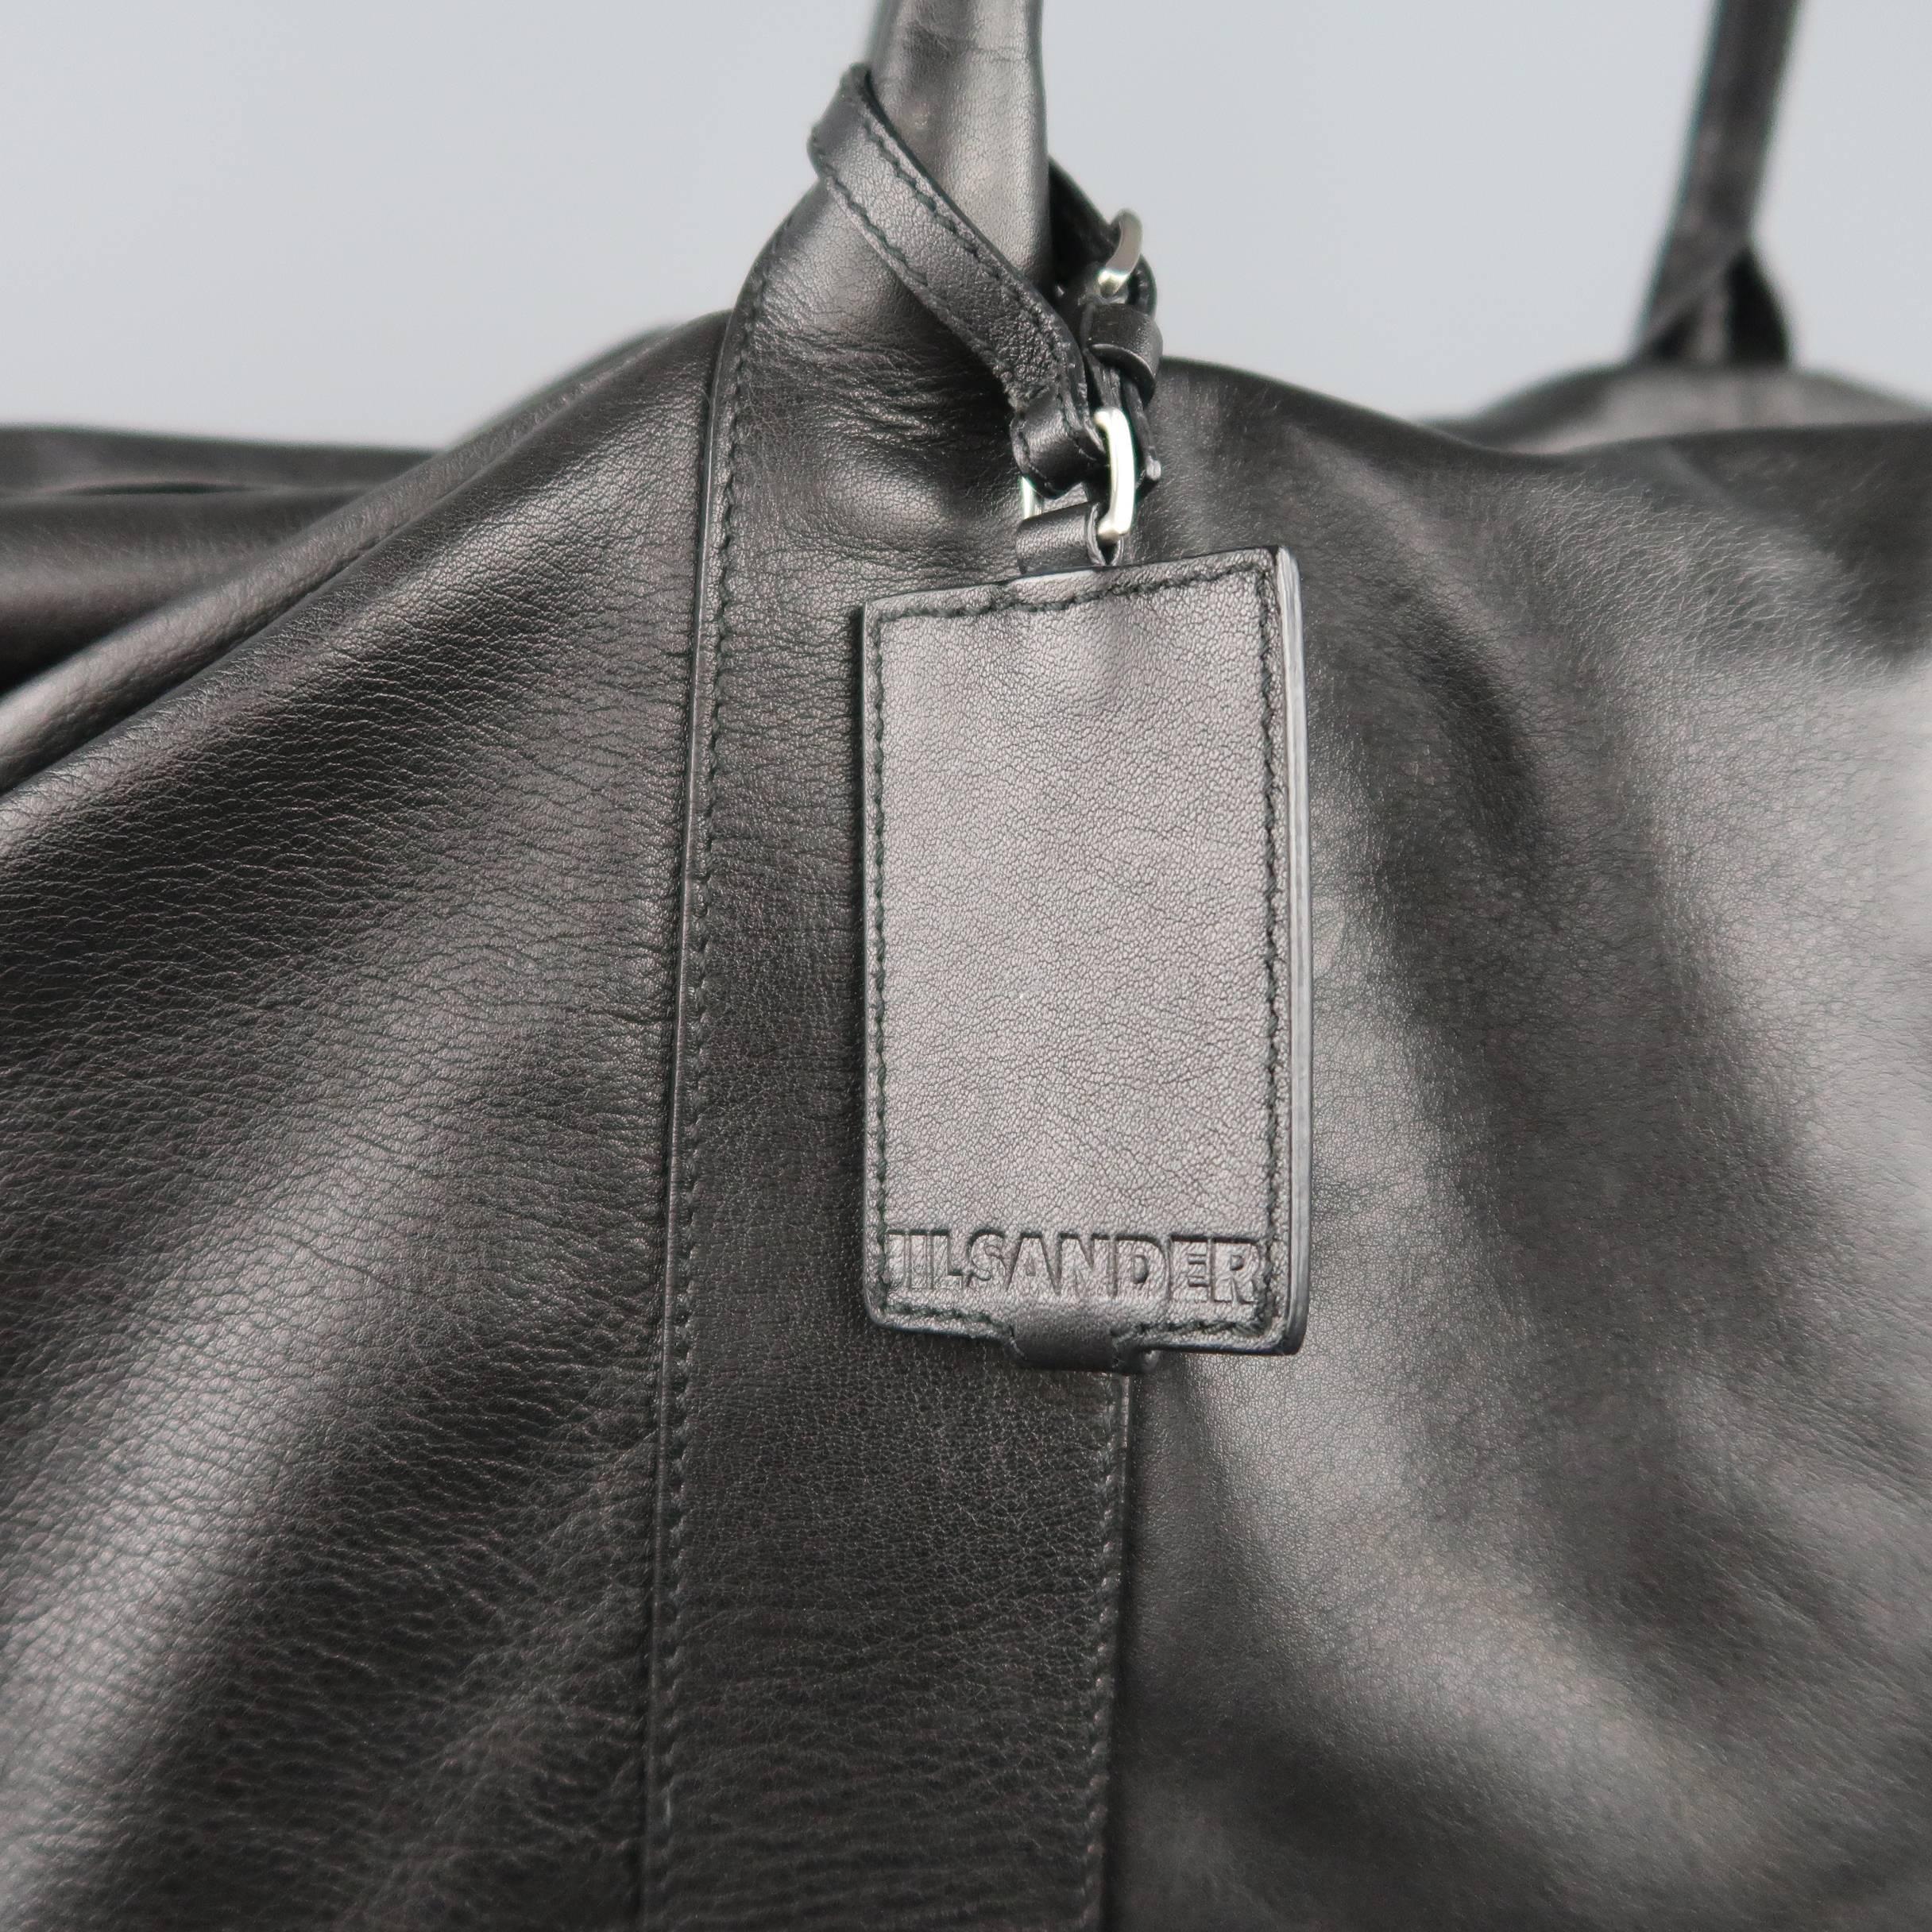 JIL SANDER weekender travel bag comes in soft black leather and features double covered top handles, embossed luggage tag, and expandable top panel with silver tone zip closure. Minor wear on leather.
 
Good Pre-Owned Condition.
 
Measurements:
